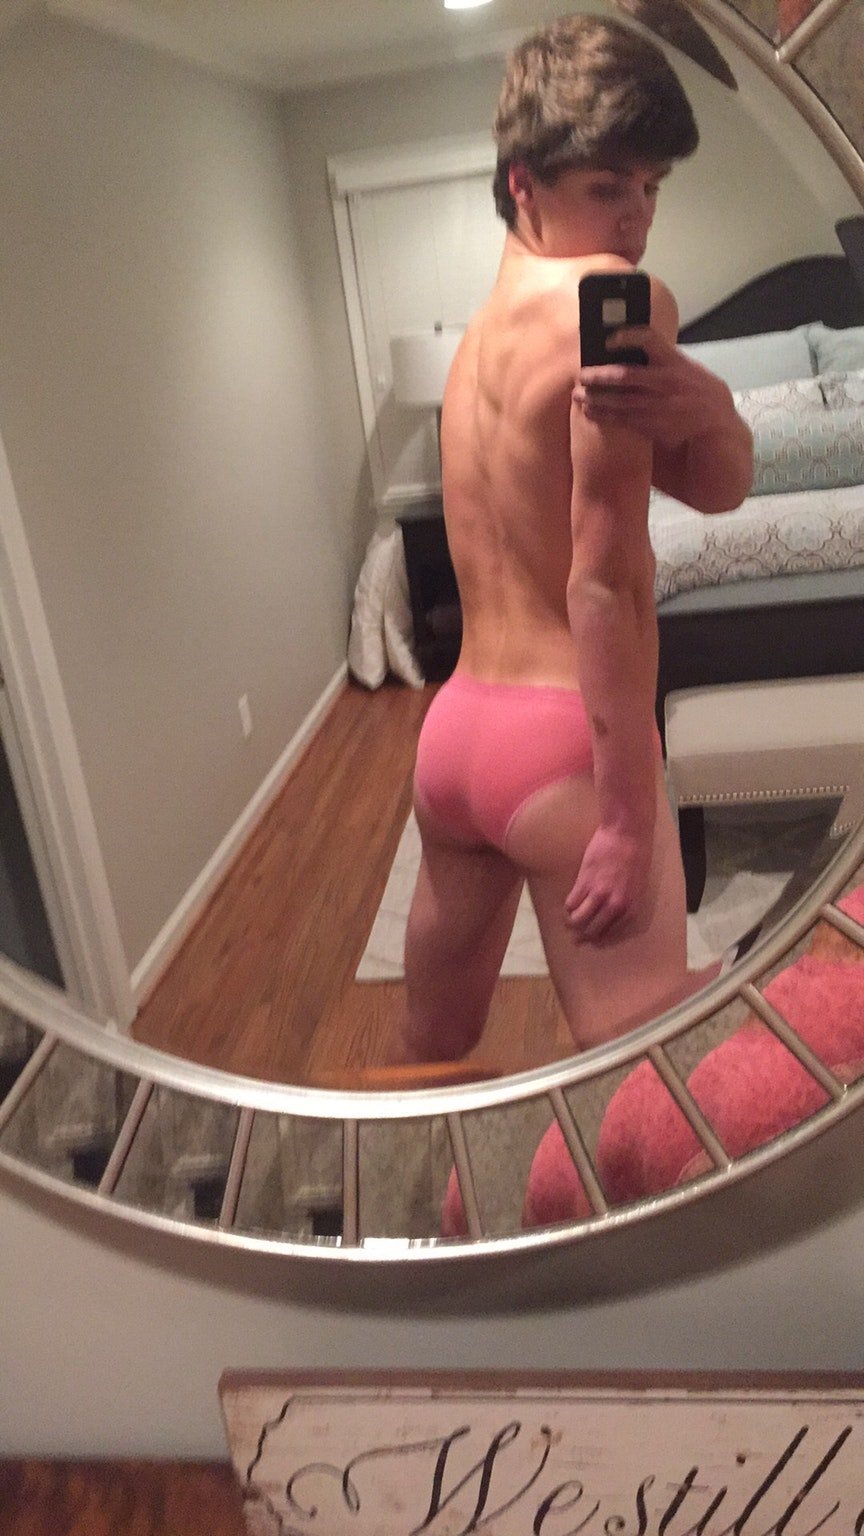 Hope y'all like this ass!!